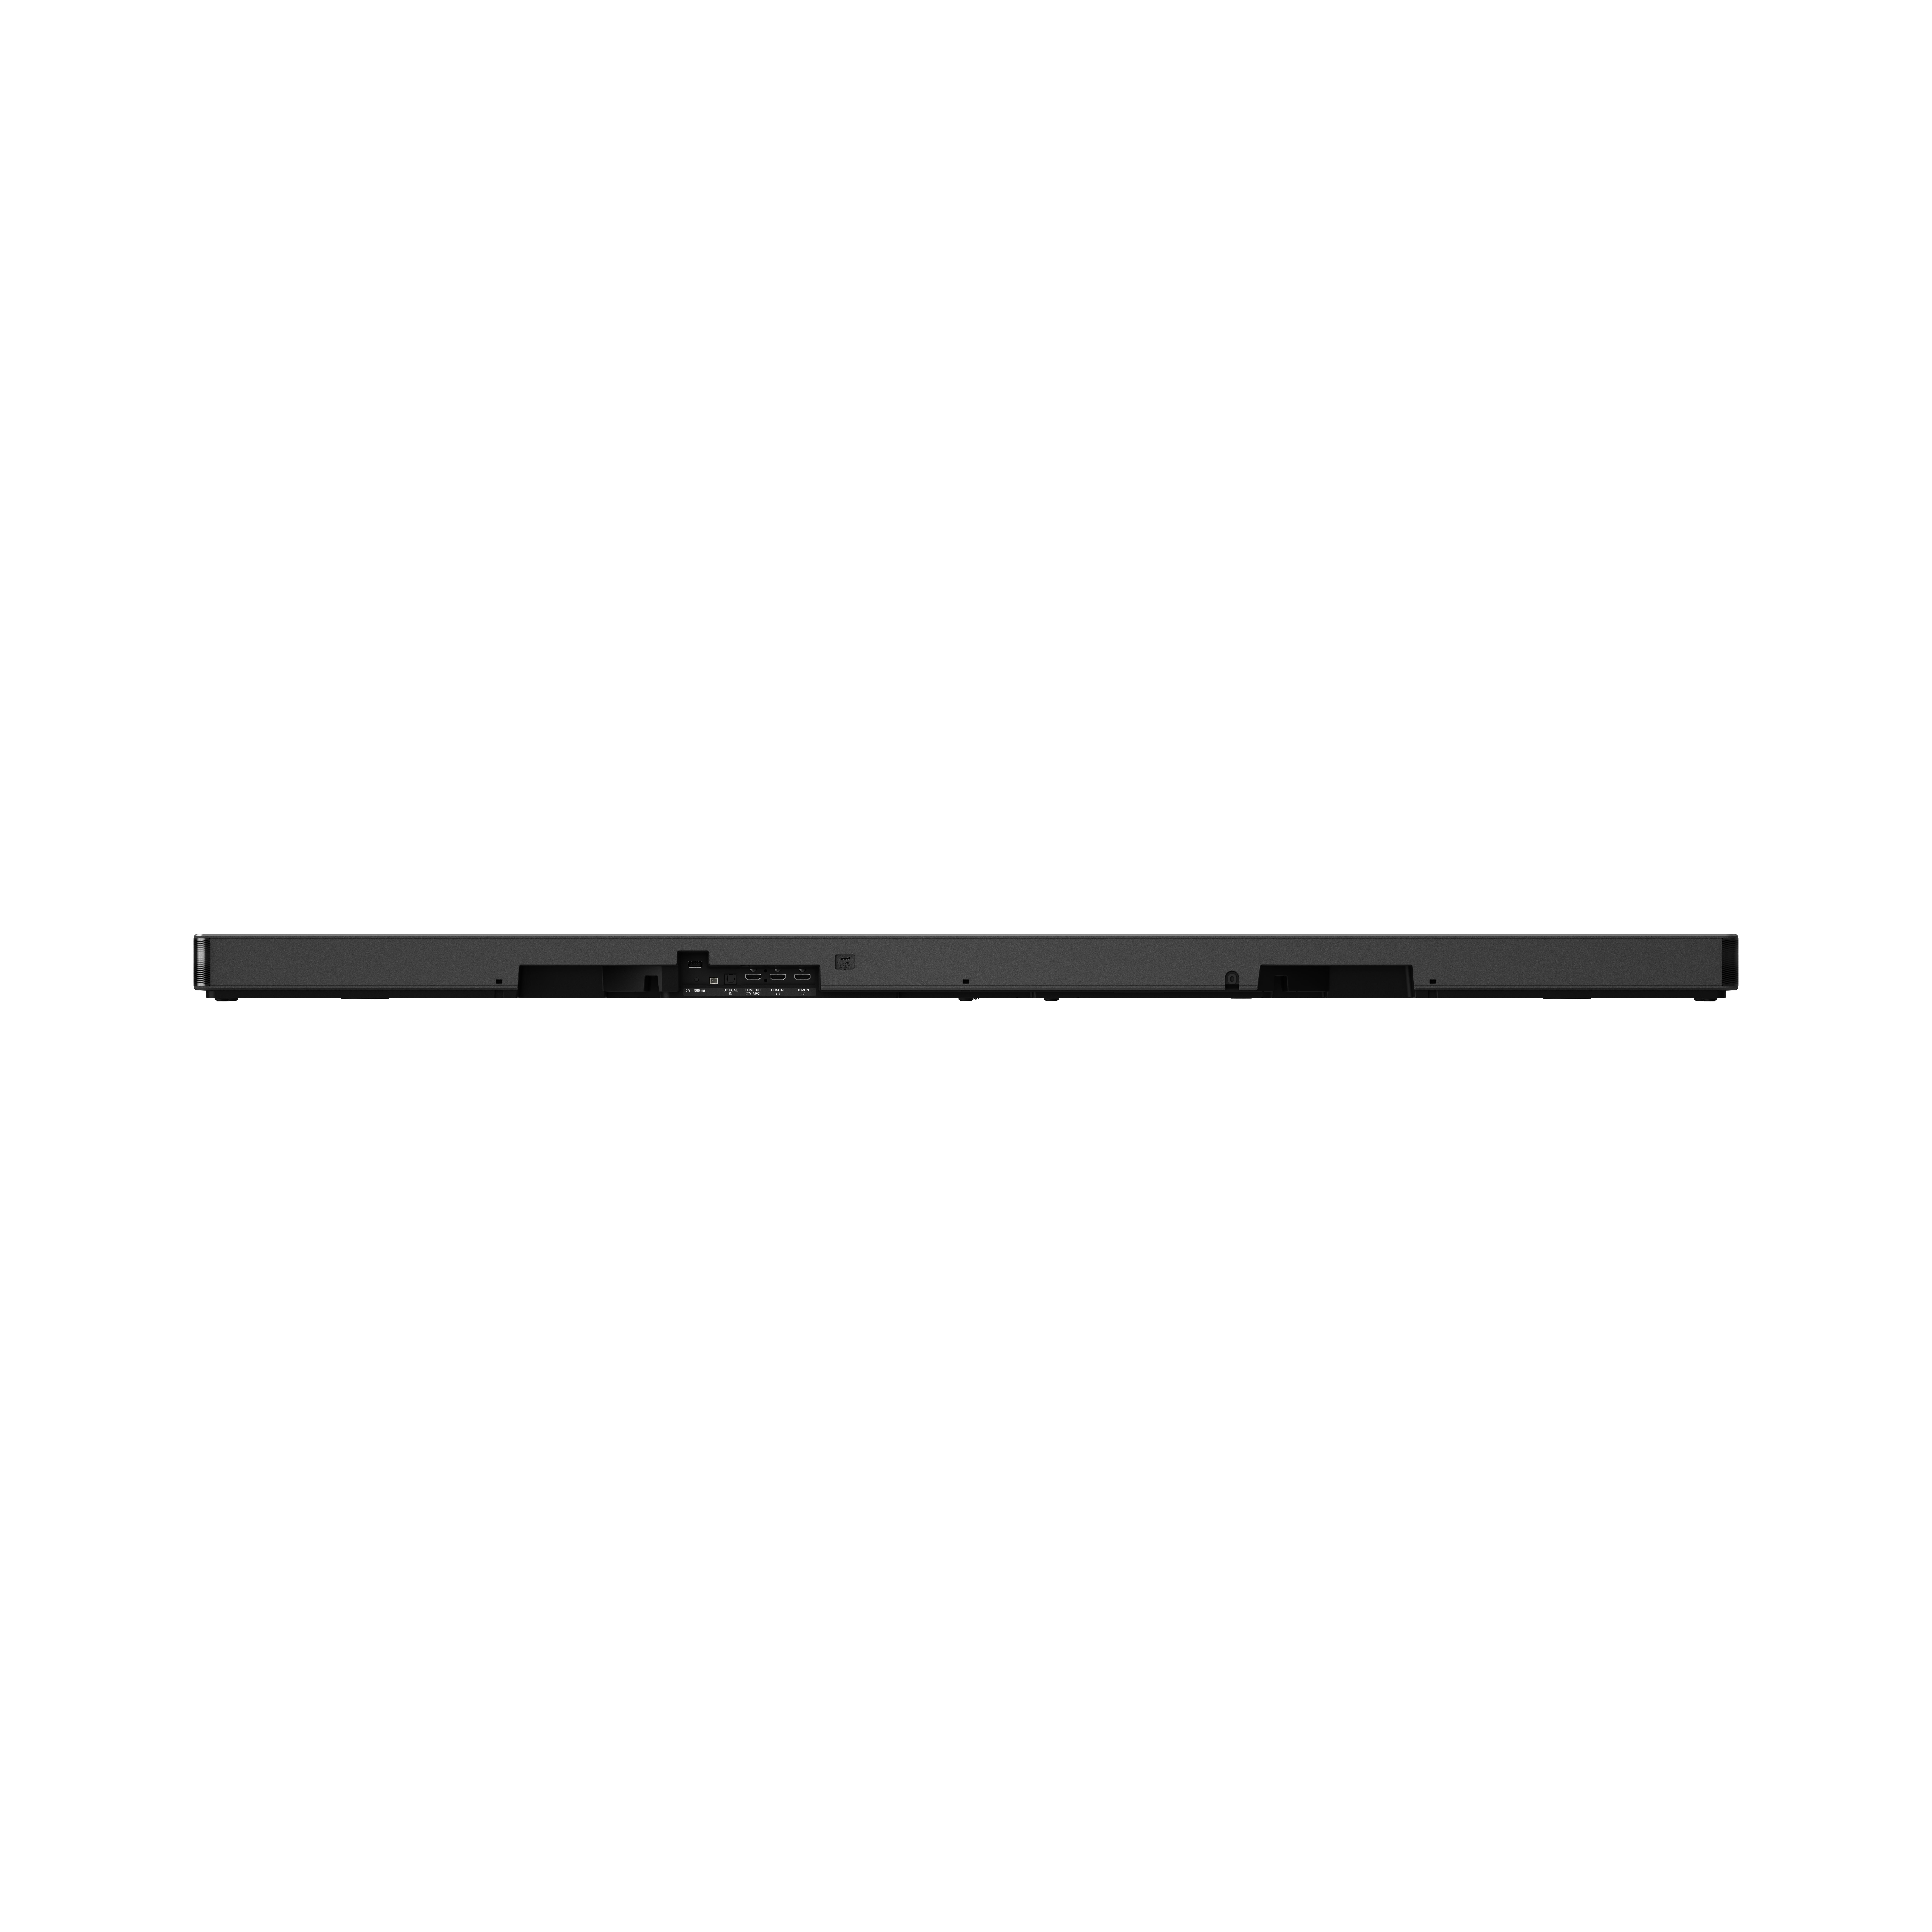 LG 7.1.4 Channel High-Res Audio Sound Bar with Dolby Atmos, Surround Speakers and Google Assistant Built-in - image 2 of 21